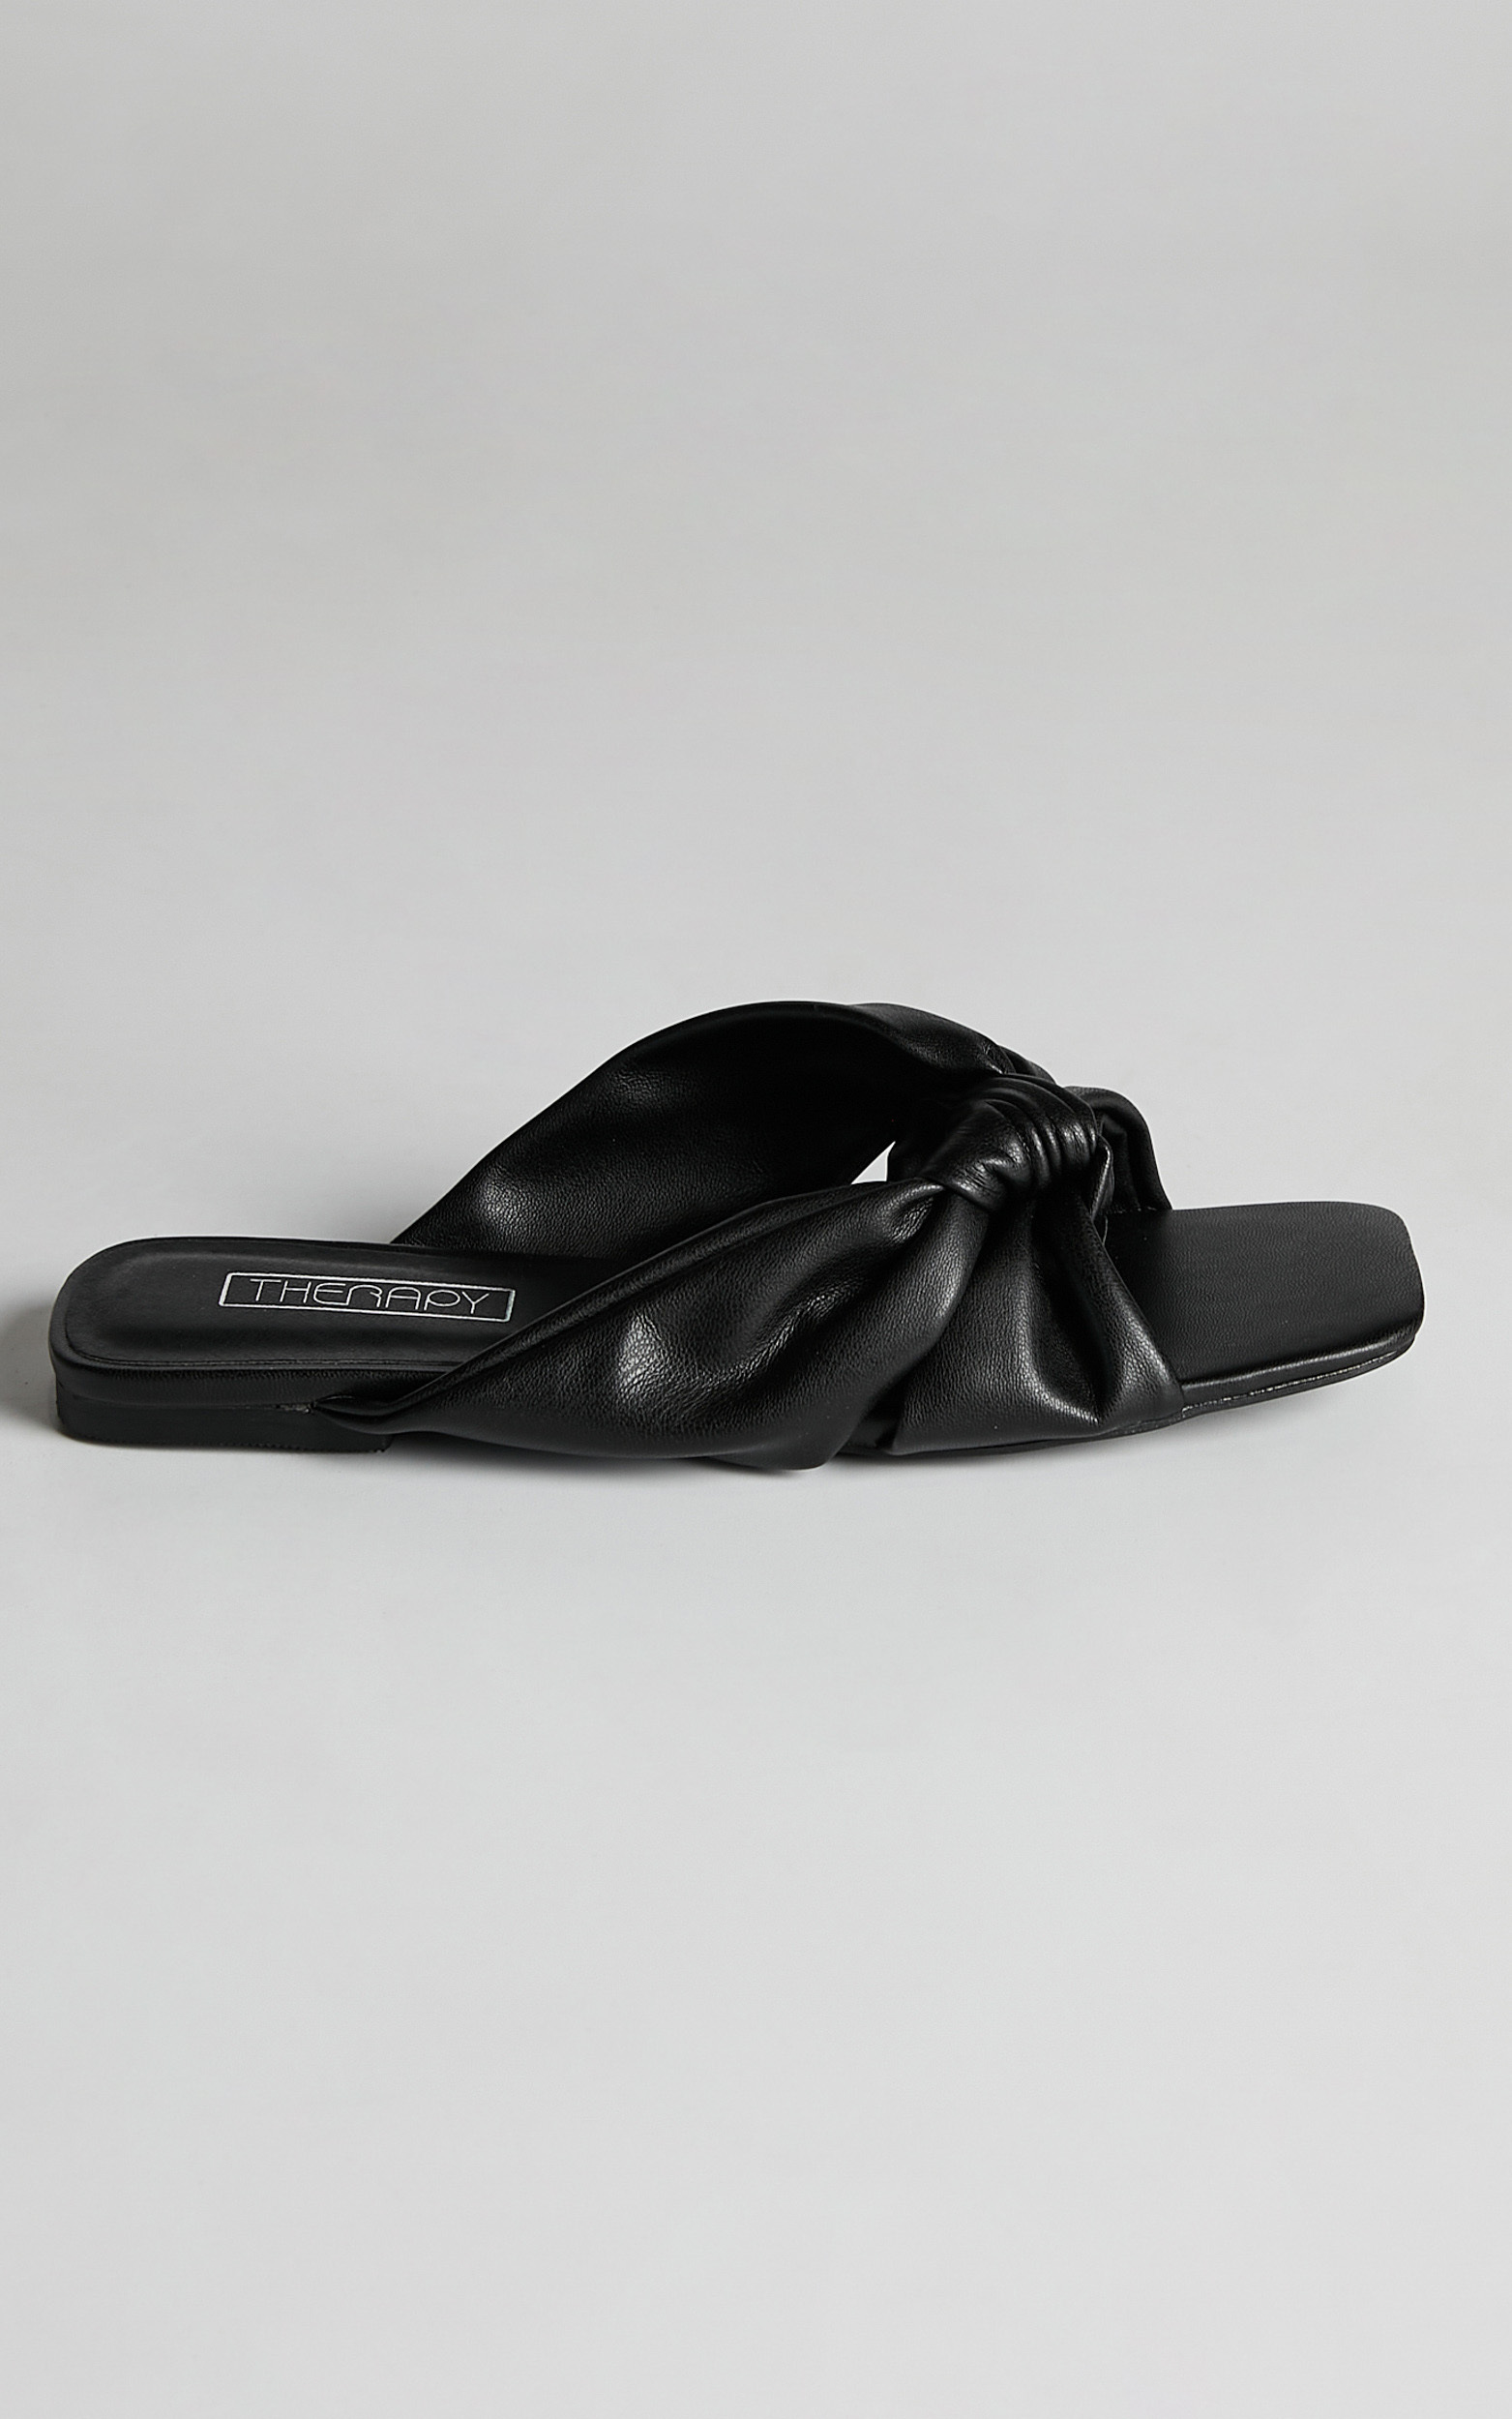 THERAPY - SOFIA SANDALS in Black - 05, BLK1, hi-res image number null